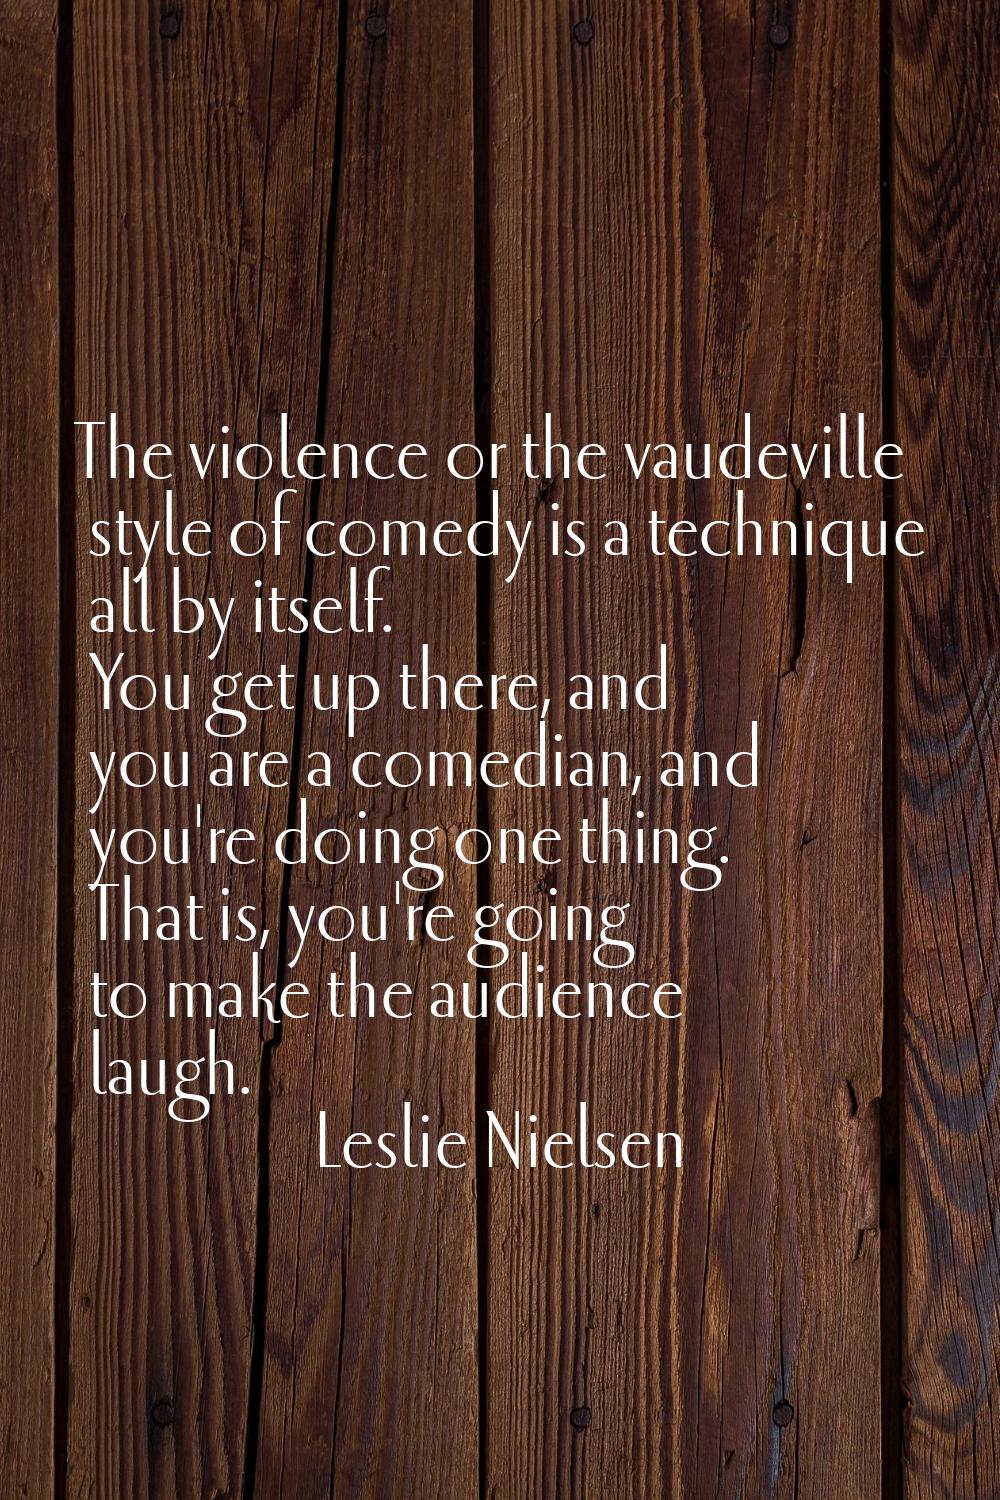 The violence or the vaudeville style of comedy is a technique all by itself. You get up there, and 